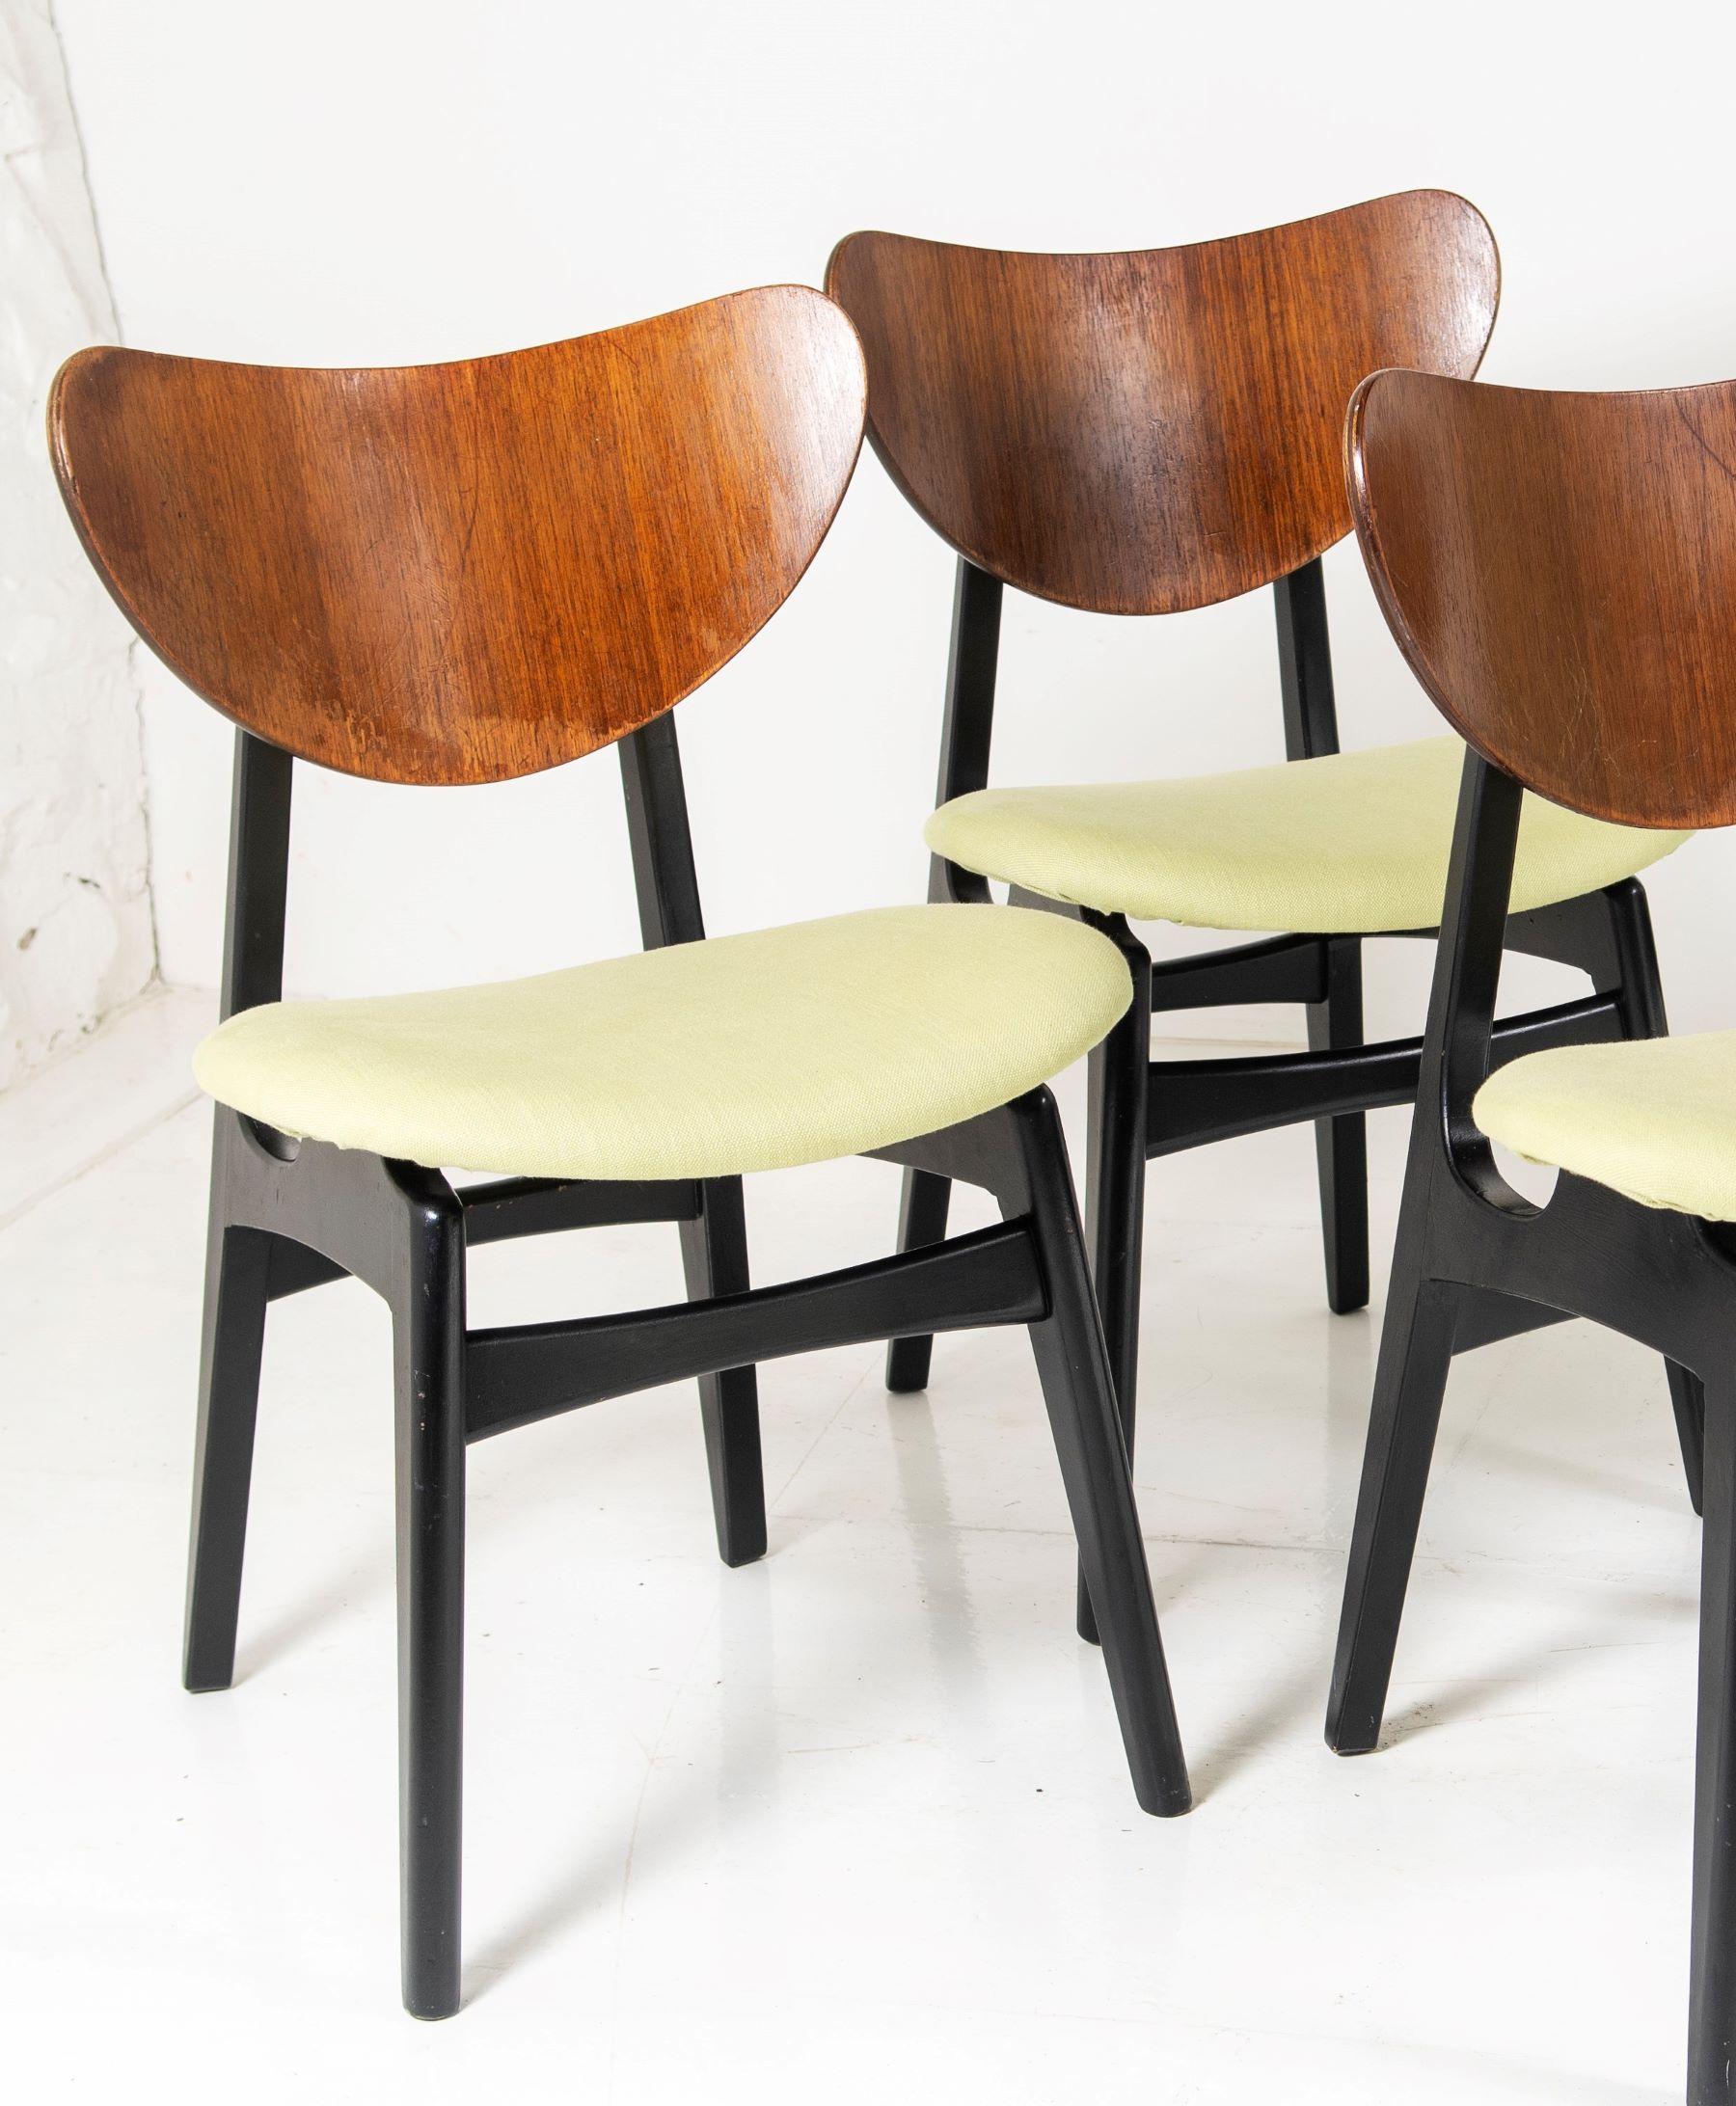 A lovely set of 4 original 1950’s G Plan dining chairs by E Gomme . From one of the pioneers of mid-century British furniture, the Butterfly chairs are both stylish and practical. these set of 4 have been re-upholstered in a lovely light green